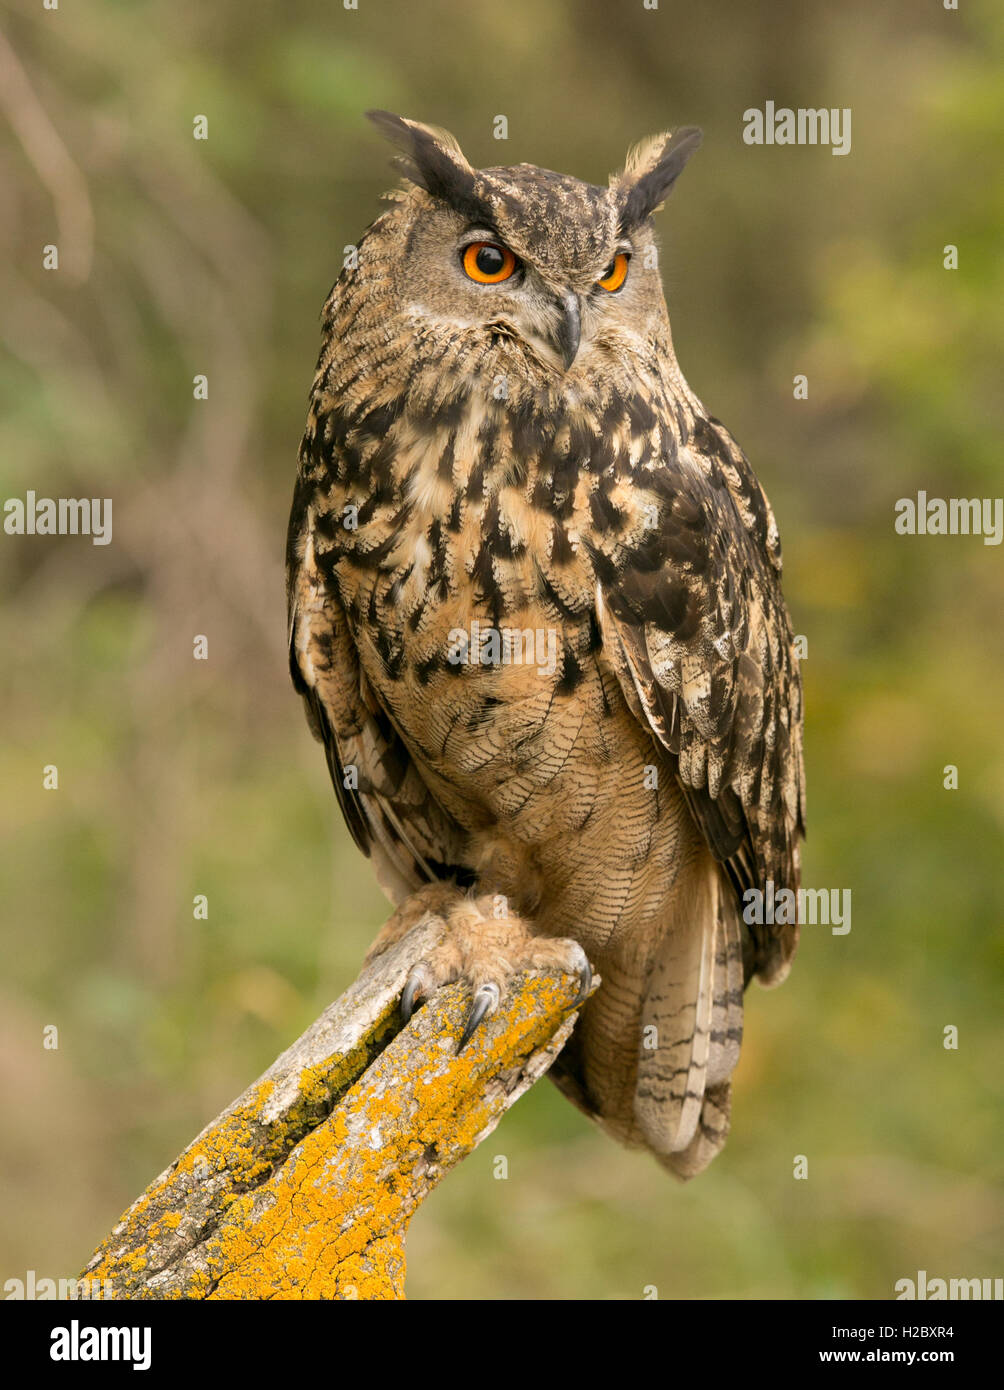 Eurasian Owl Perched On A Mossy Stump Stock Photo